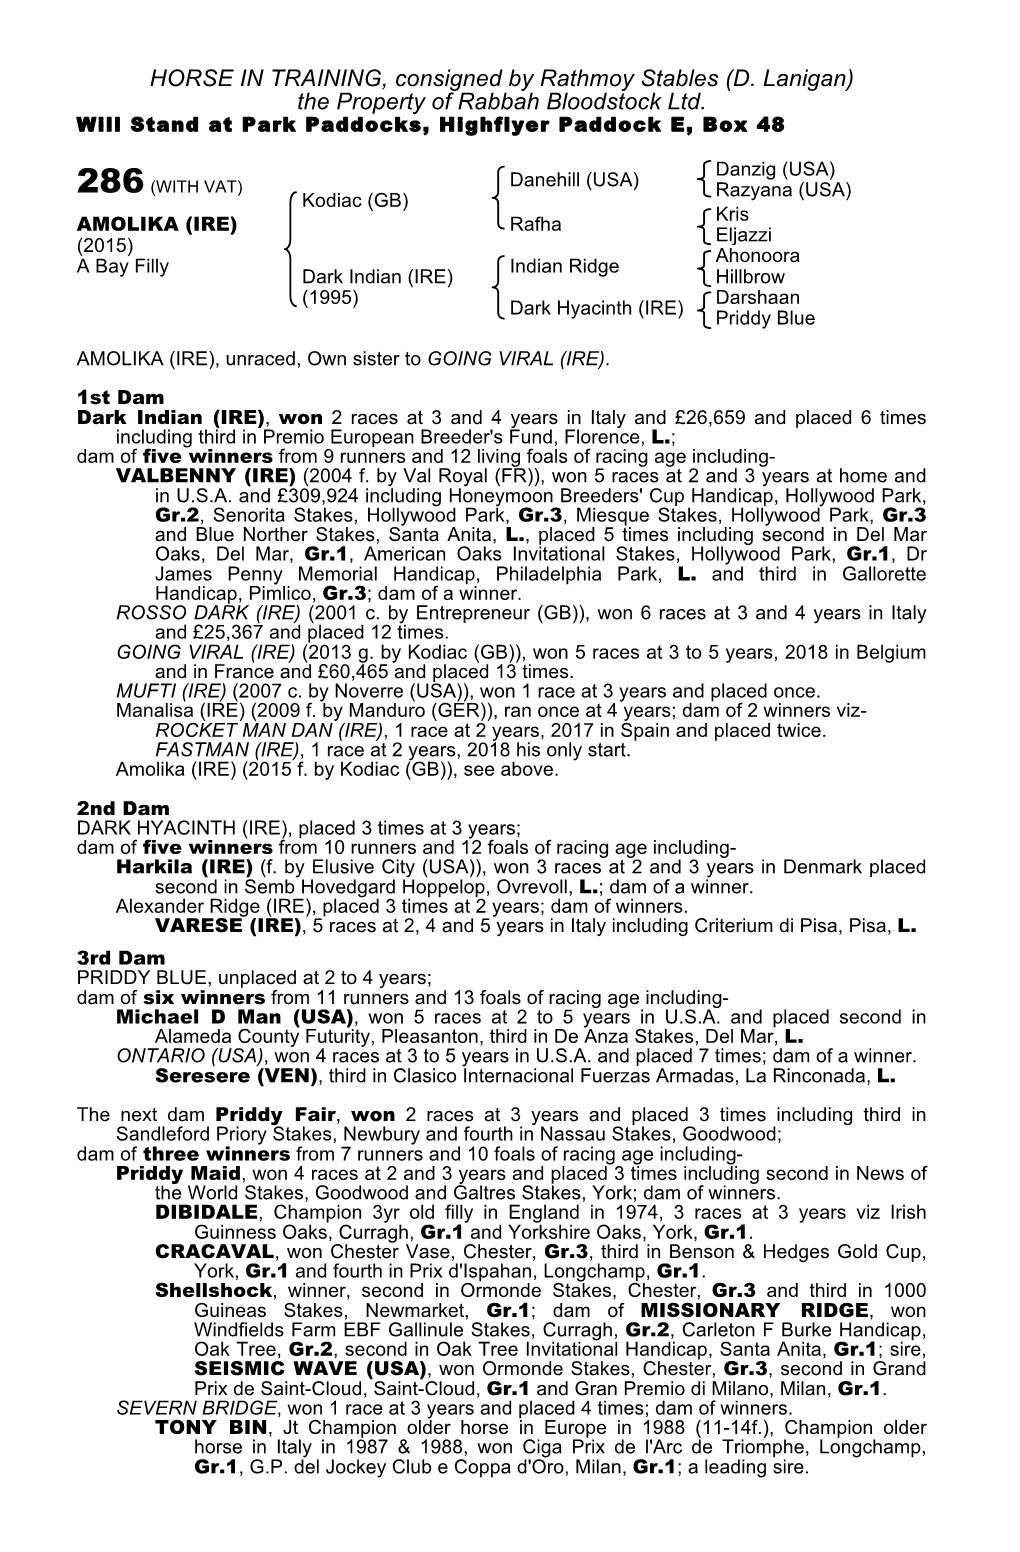 HORSE in TRAINING, Consigned by Rathmoy Stables (D